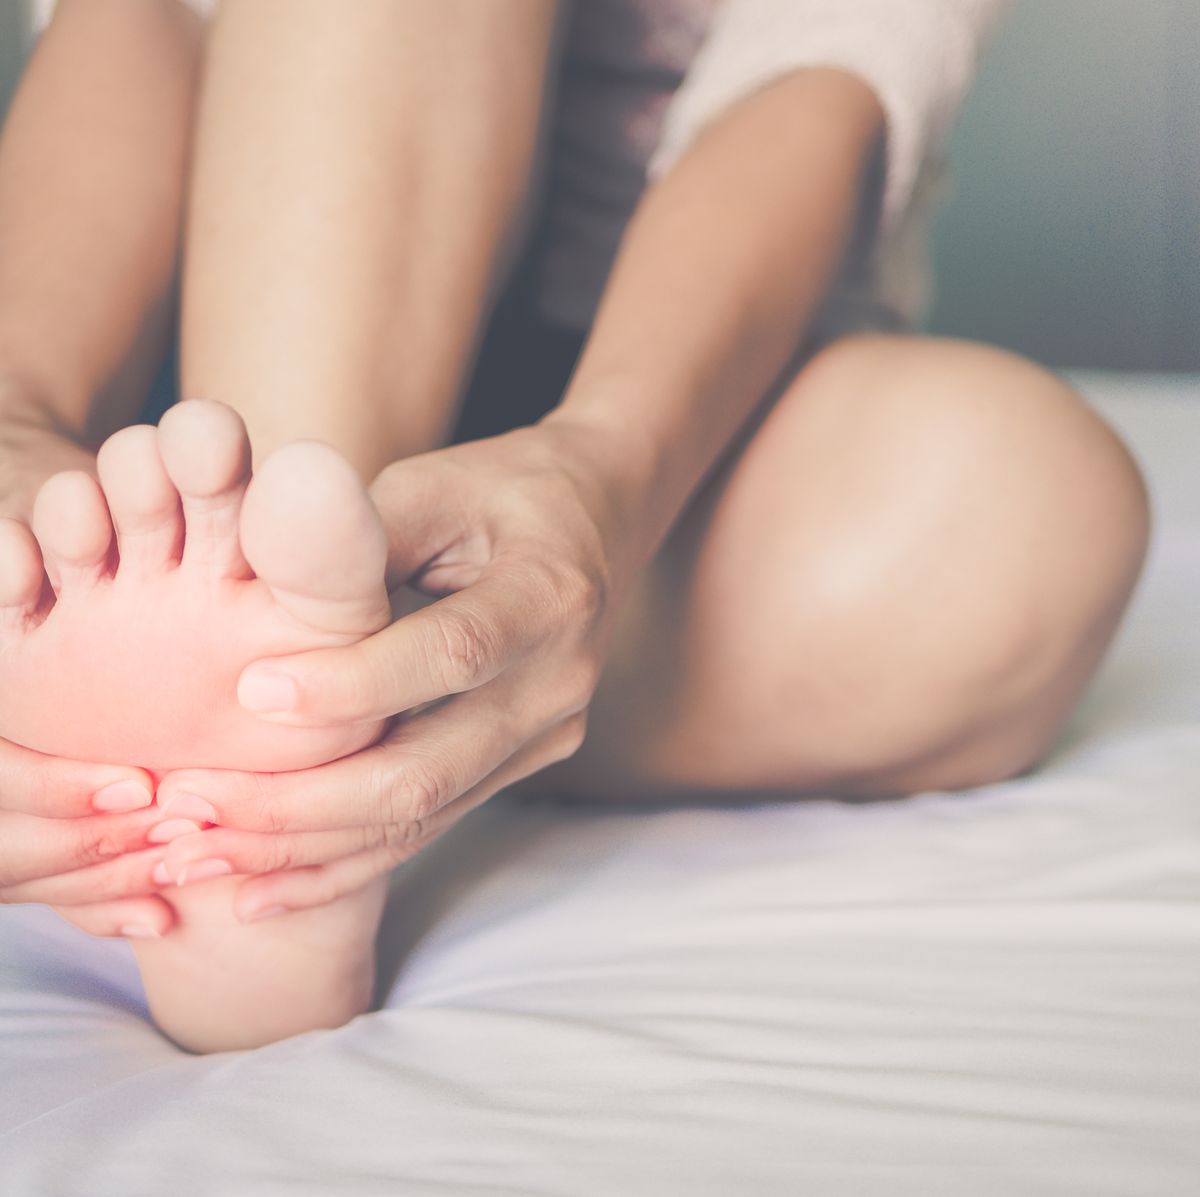 6 Causes Of Toe Cramping And Curling How To Get Rid Of Toe Cramps